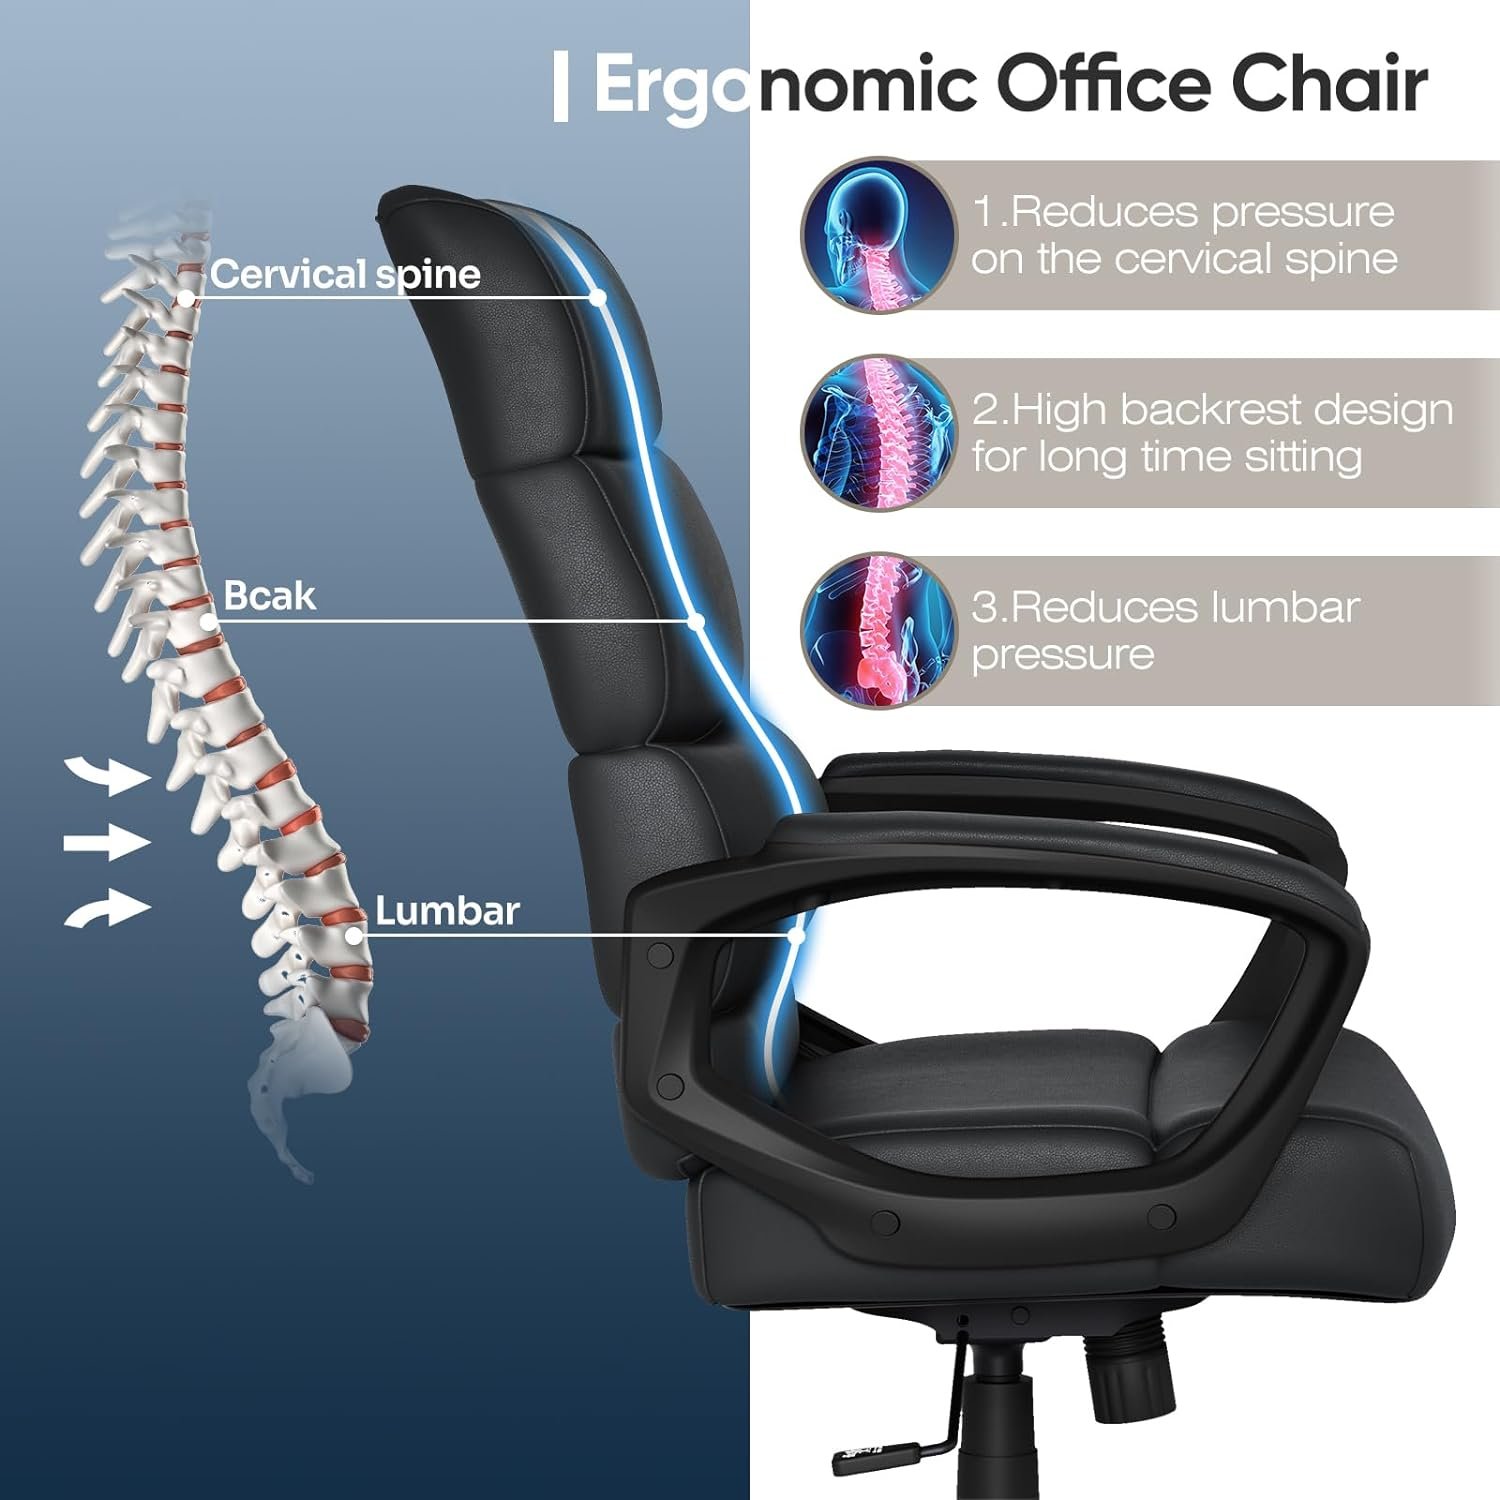 Ergonomic Executive Office Chair,Leather High Back Desk Chair, Tall Computer Chair with Armrest, Adjustable Height,Swivel Rolling Home Office Desk Chair with Wheels, Black